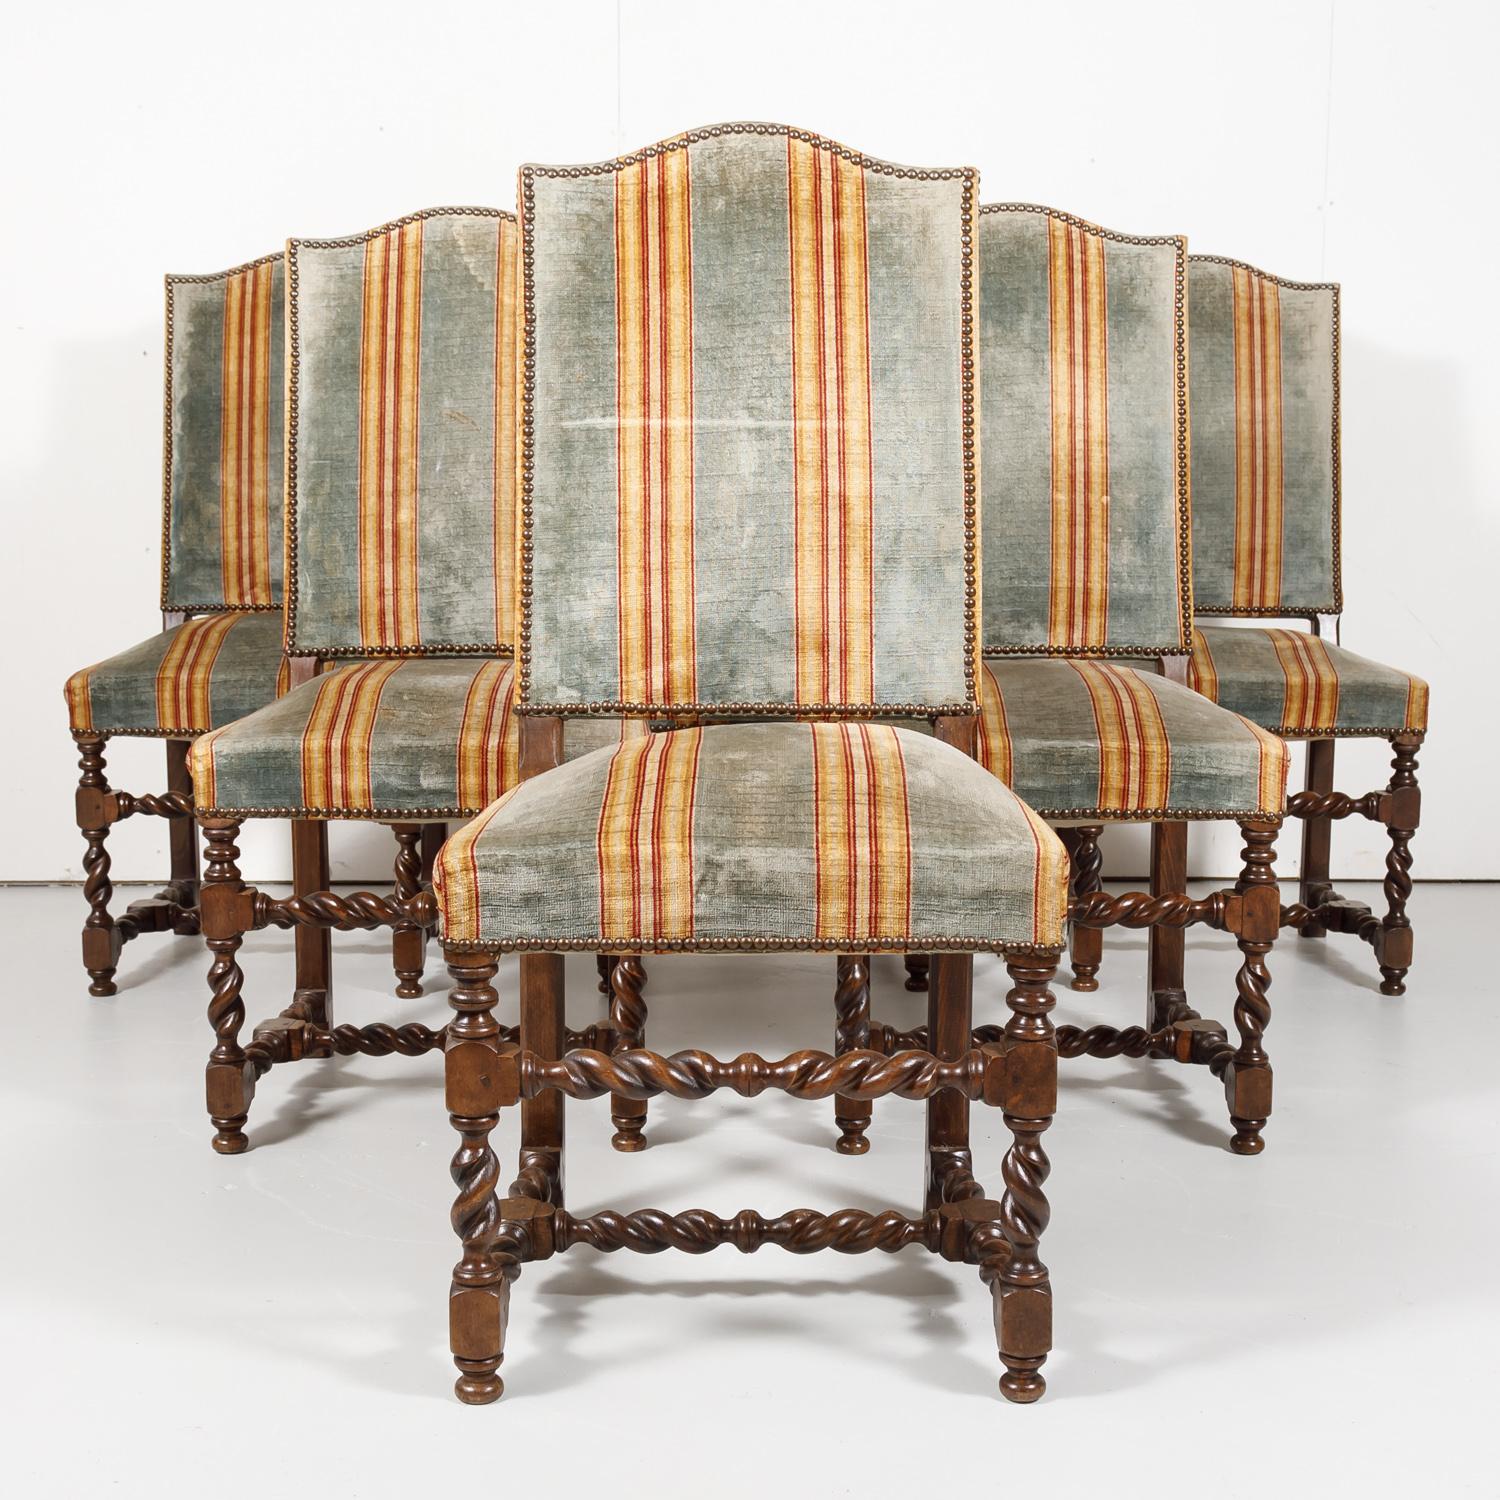 Set of six antique French Louis XIII style barley twist dining side chairs handcrafted and carved of French walnut in Lyon, having high chapeau de gendarme backs and nail head trim, circa 1890s. Raised on turned barley twist legs with barley twist